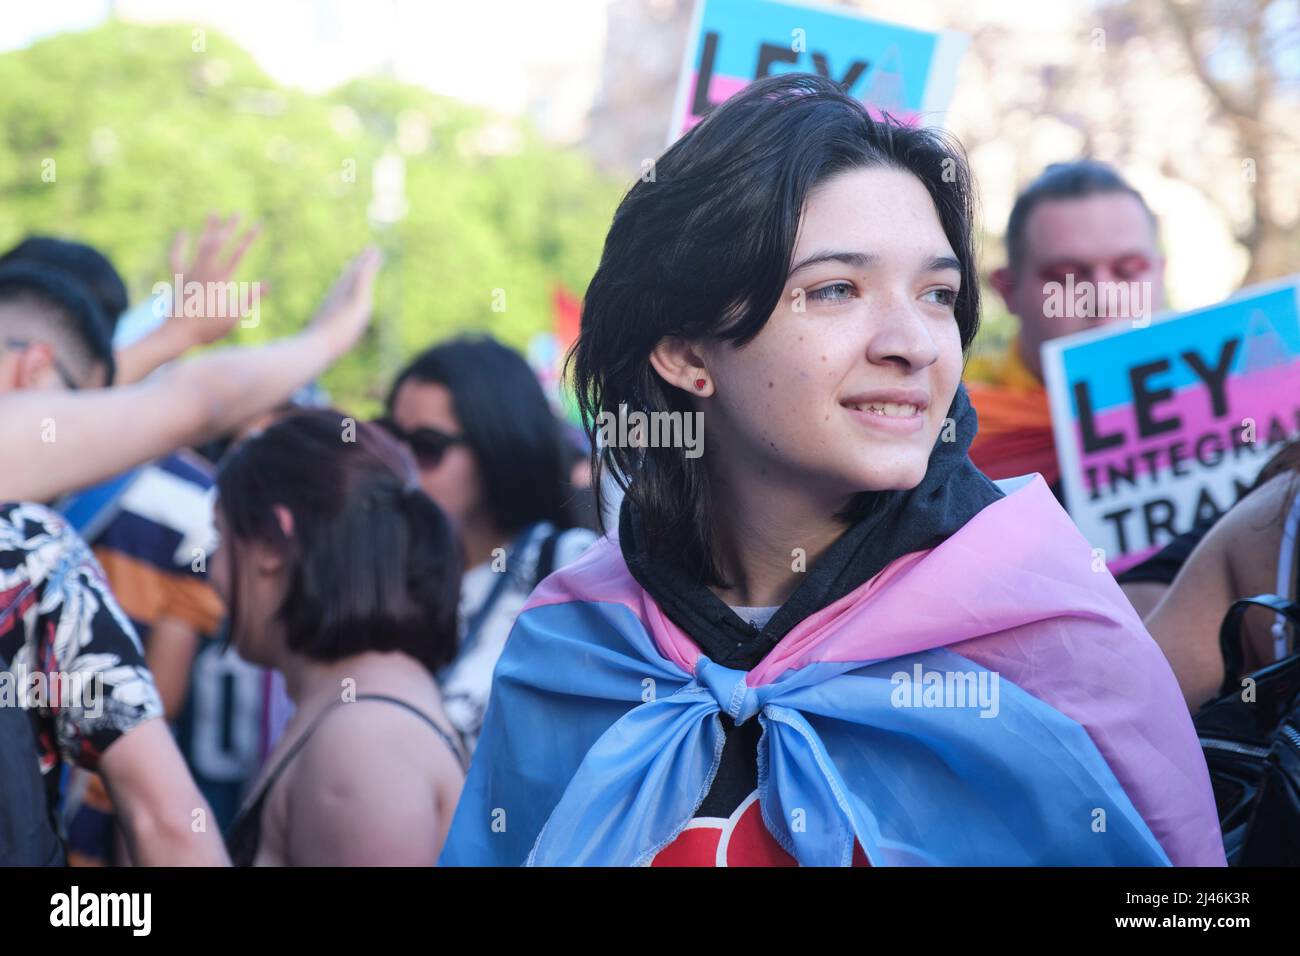 Buenos Aires, Argentina; Nov 6, 2021: LGBT Pride Parade. Young woman with the trans flag marching for a comprehensive transgender law. Stock Photo